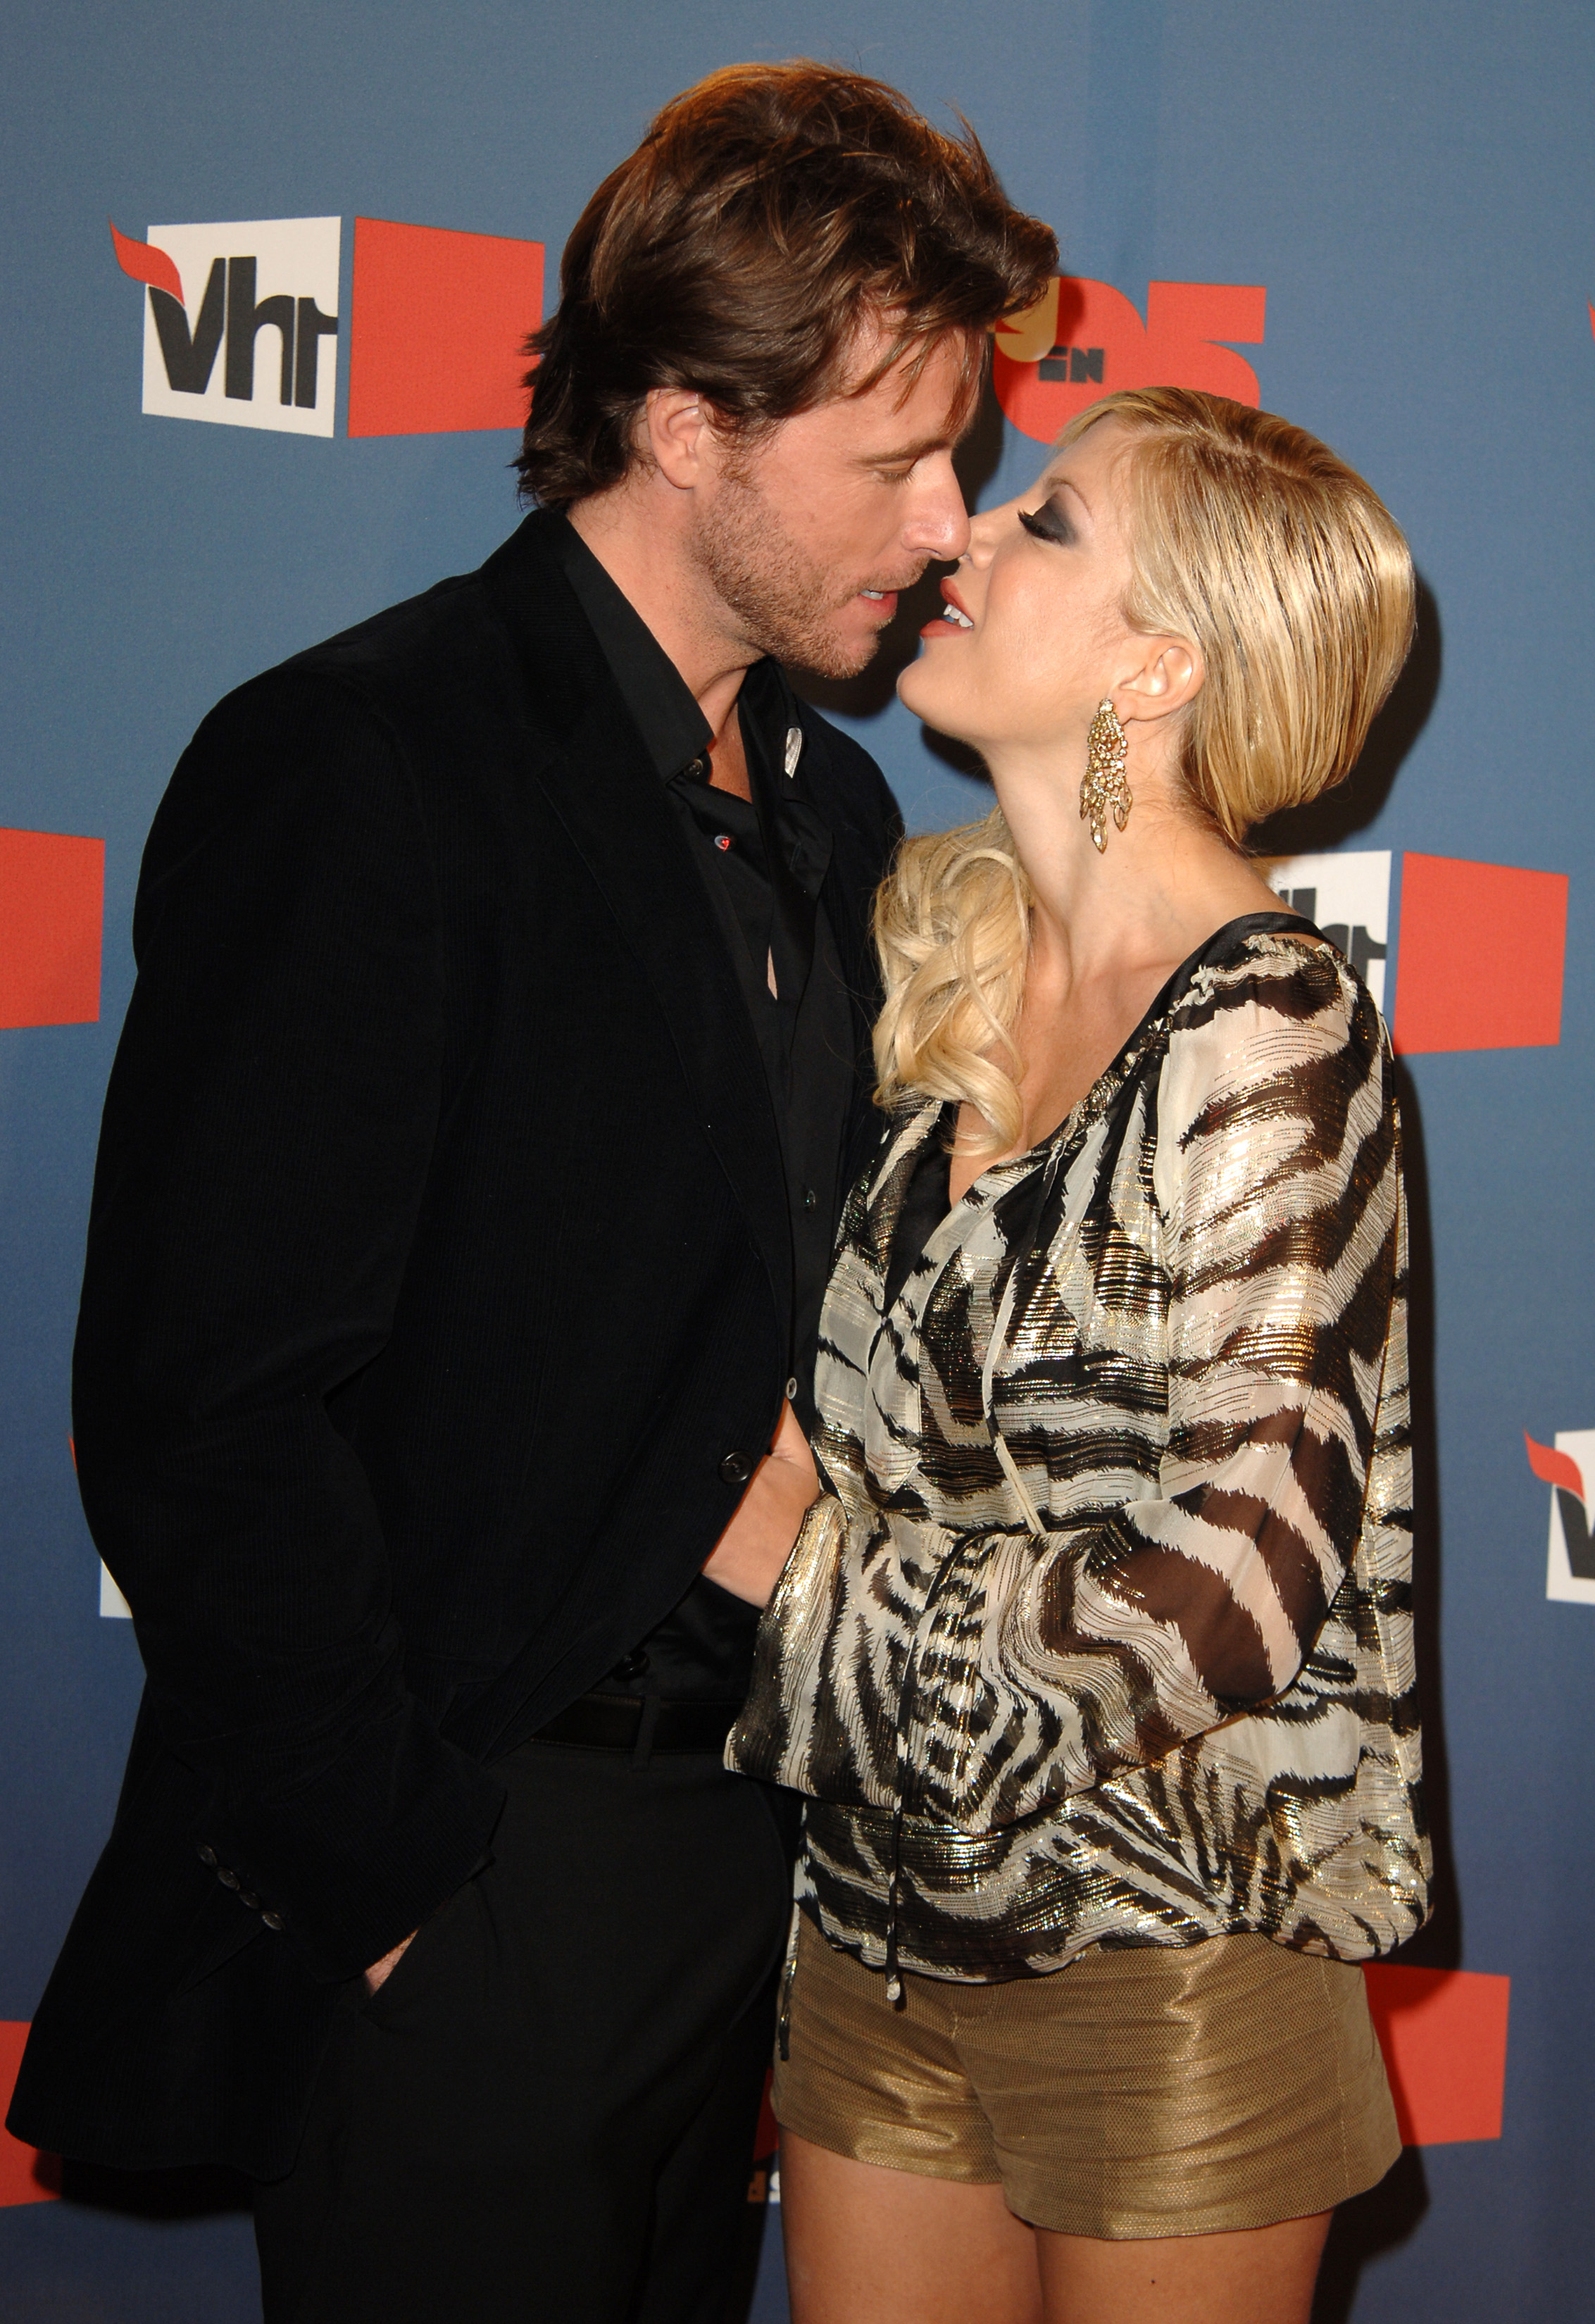 Dean McDermott and Tori Spelling during VH1 Big in '05 - Arrivals in Culver City, California, on December 3, 2005. | Source: Getty Images